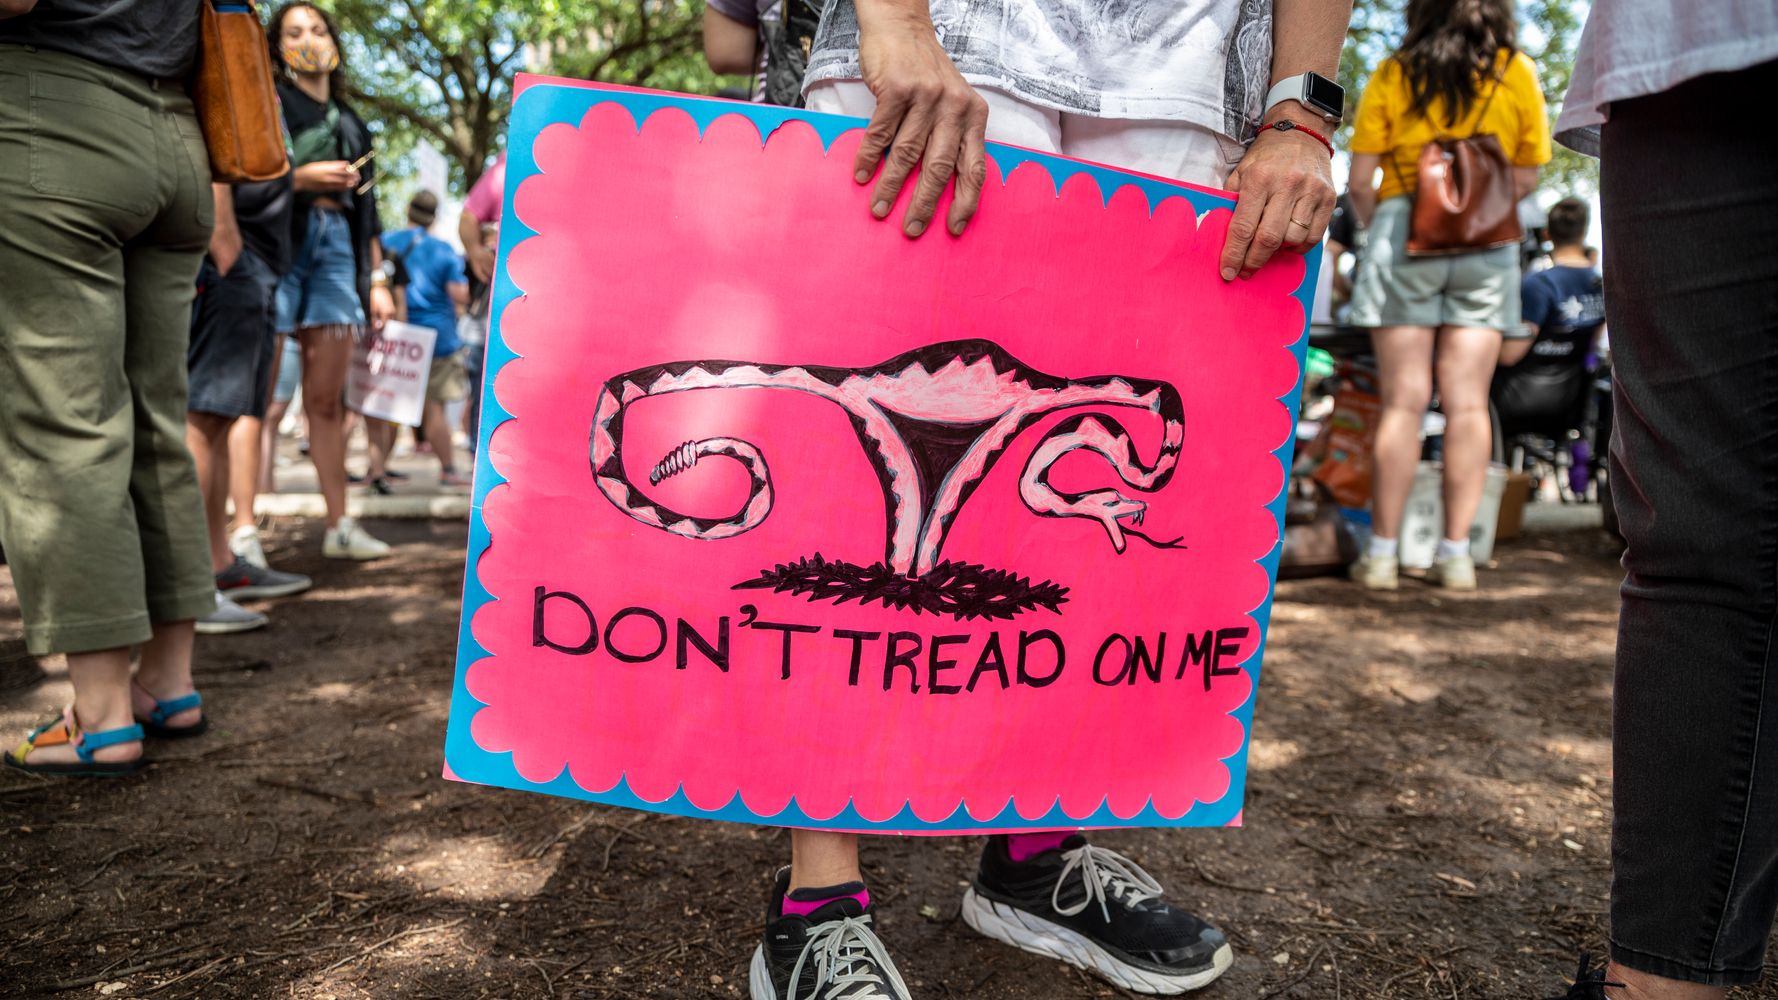 Texans Are 'Scared, Confused, Angry' As Extreme Abortion Ban Goes Into Effect